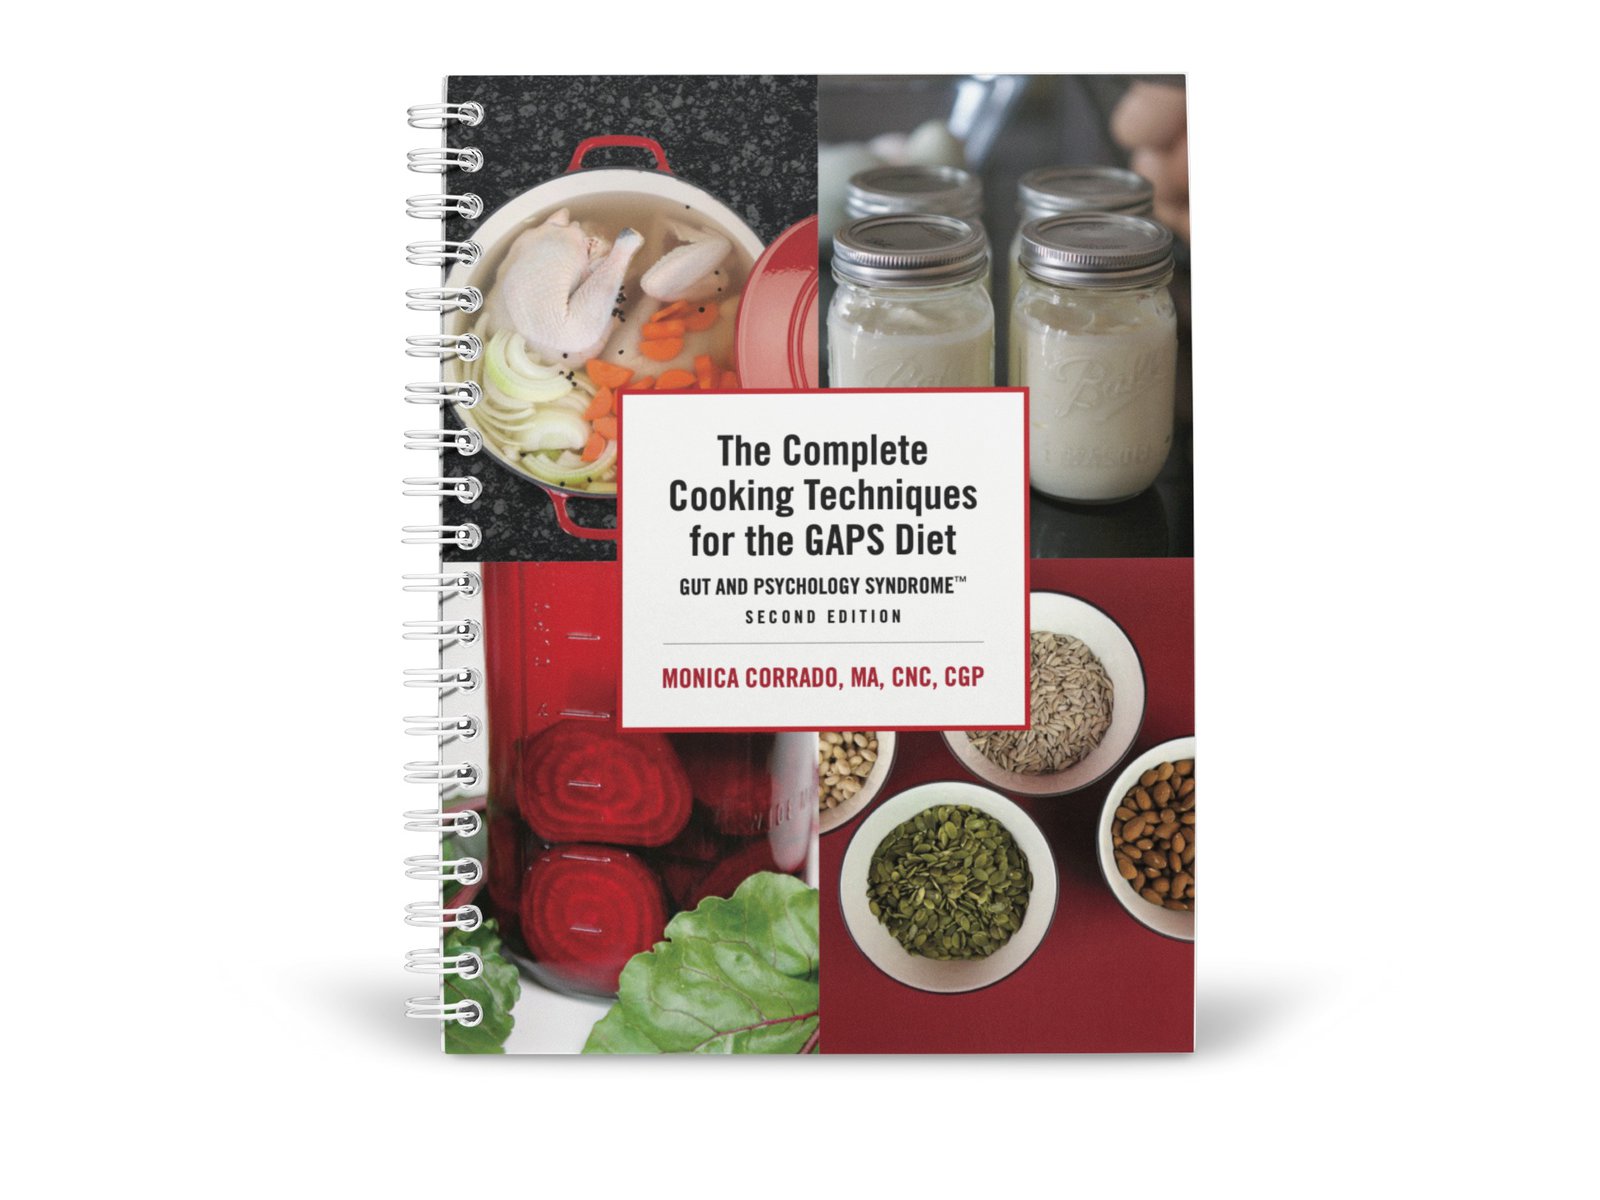 The cover of The Complete Cooking Techniques for the GAPS Diet 2nd Edition Book